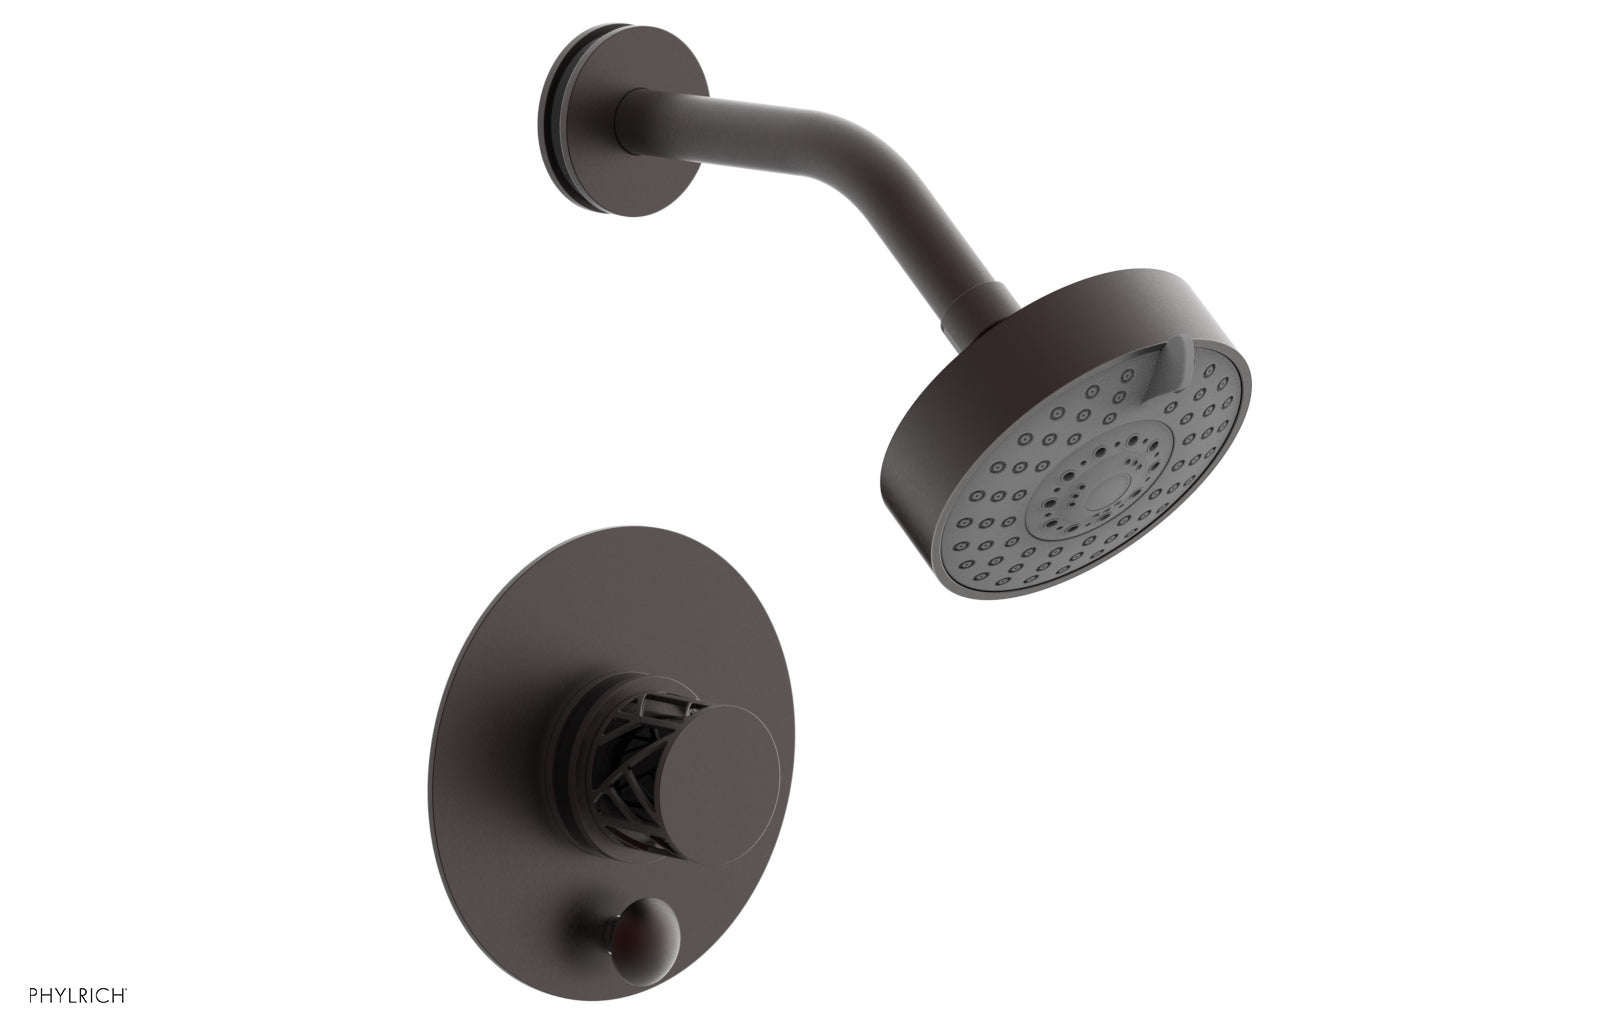 Phylrich JOLIE Pressure Balance Shower and Diverter Set (Less Spout), Round Handle with "Black" Accents